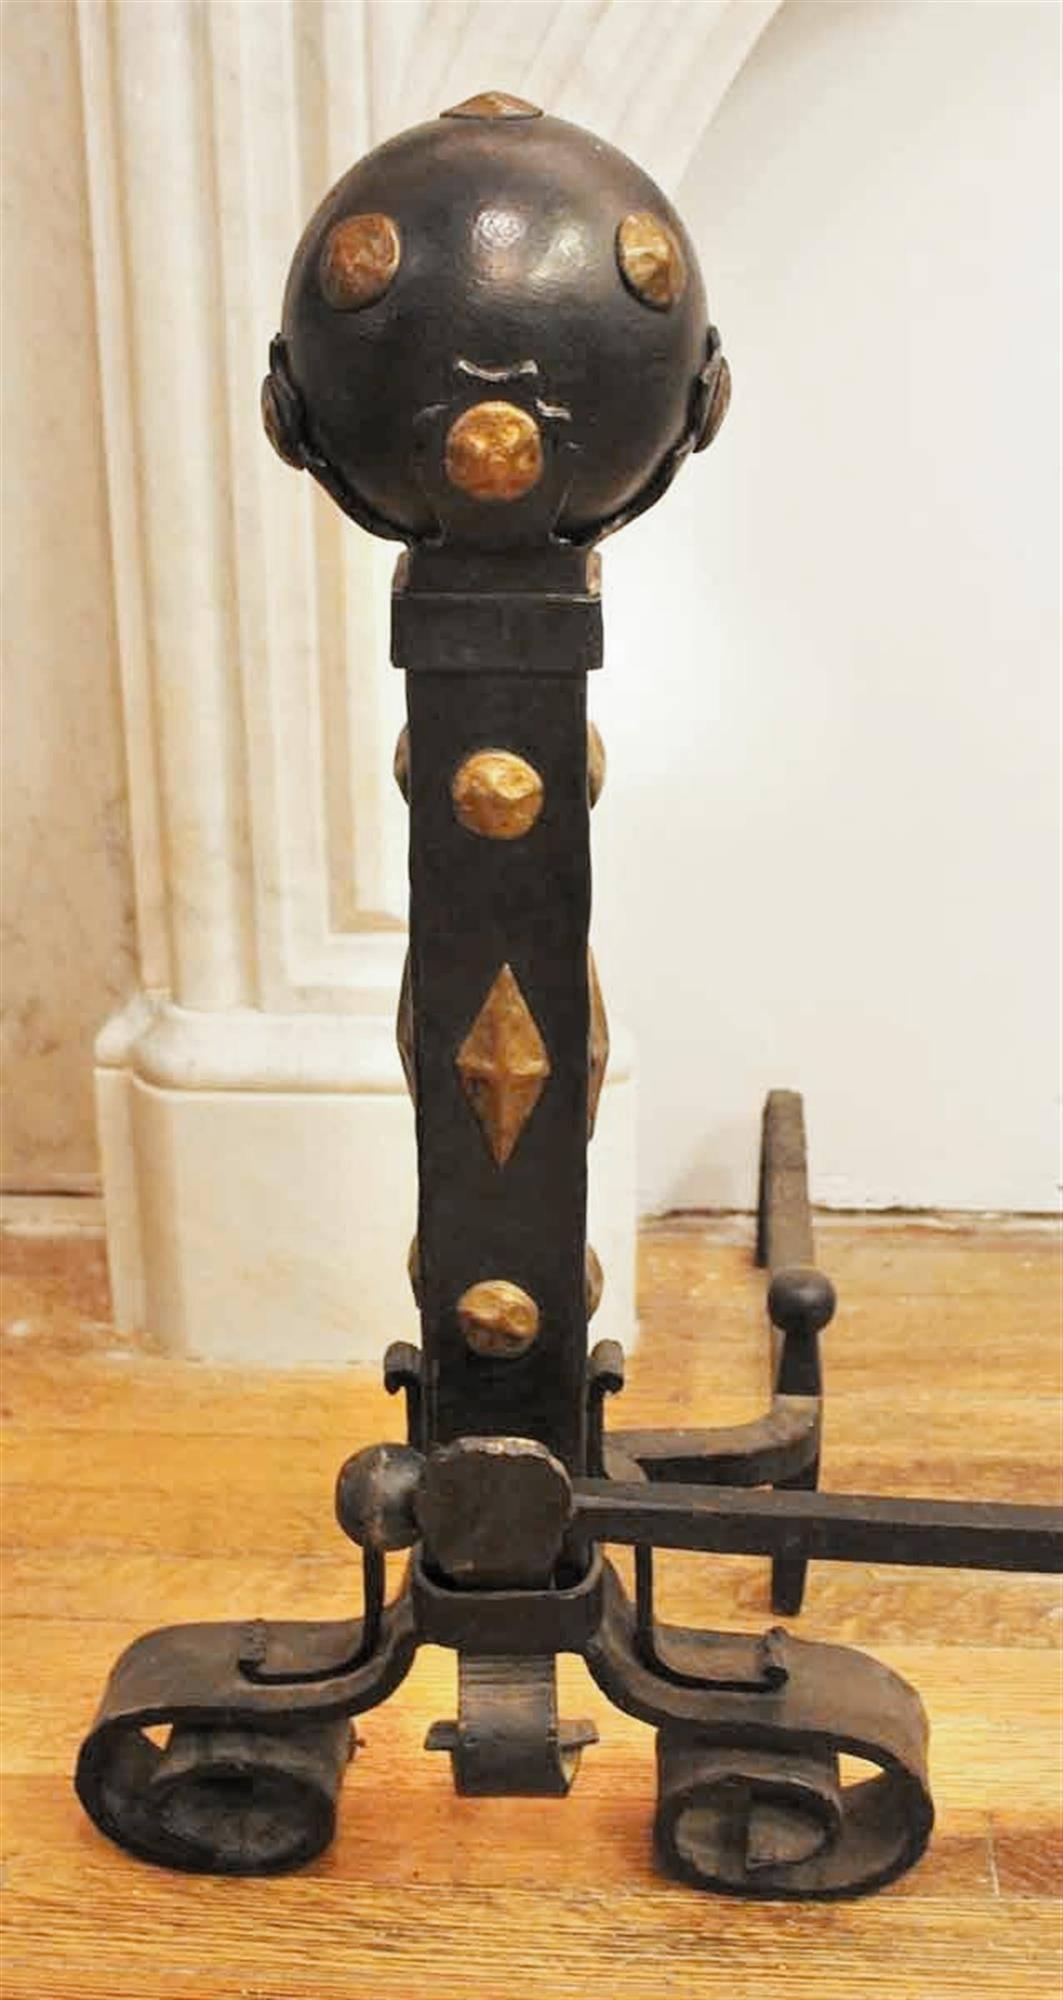 Set of 1910 Arts & Crafts brass and wrought iron andirons with a cross bar. This can be seen at our 2420 Broadway location on the upper west side in Manhattan.